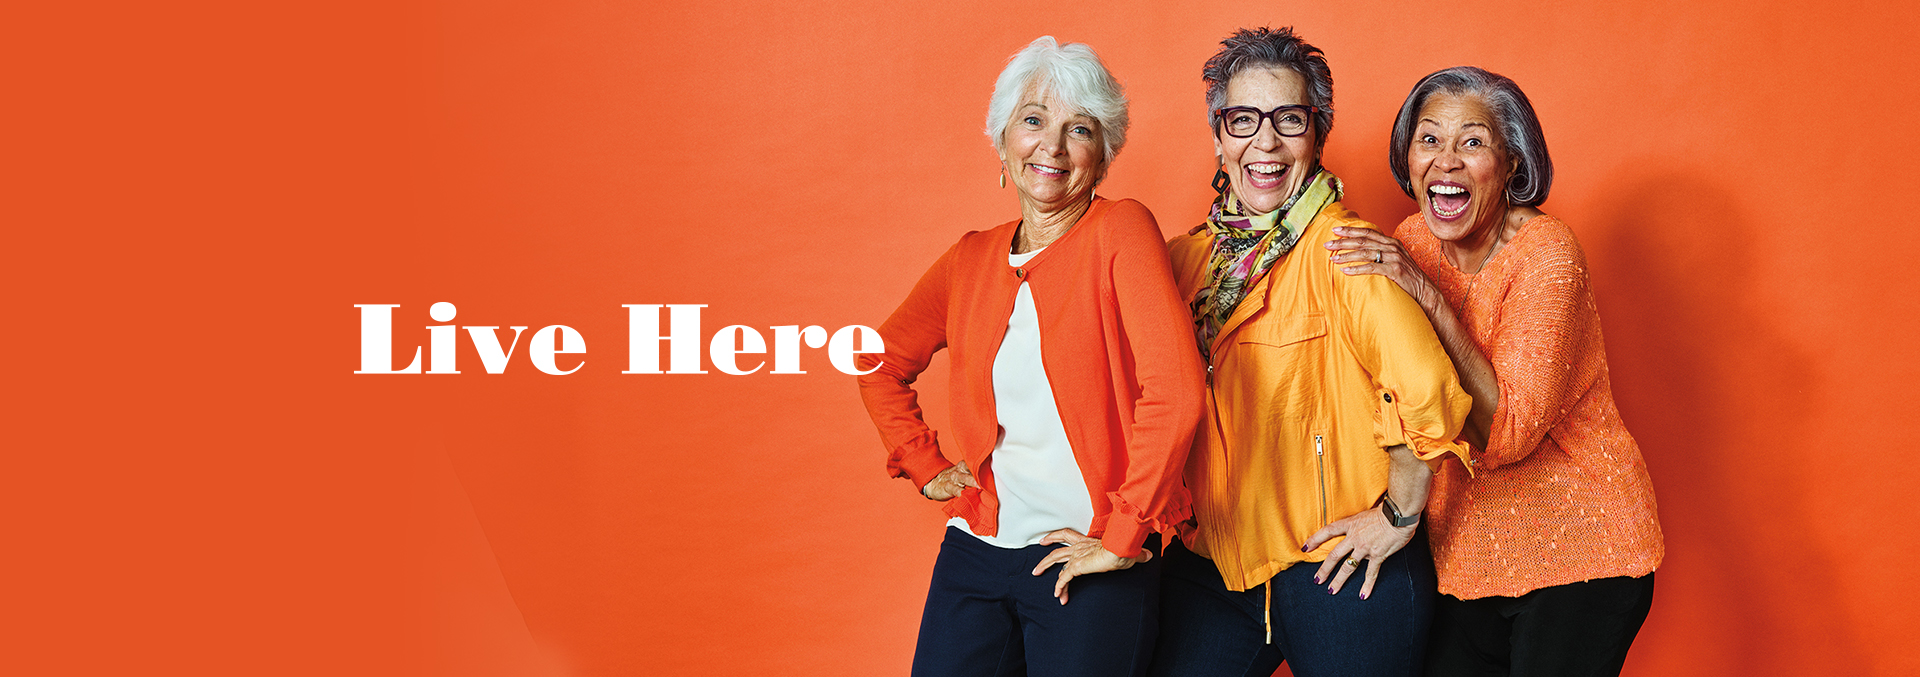 Live Here banner with three women standing in front of an orange background